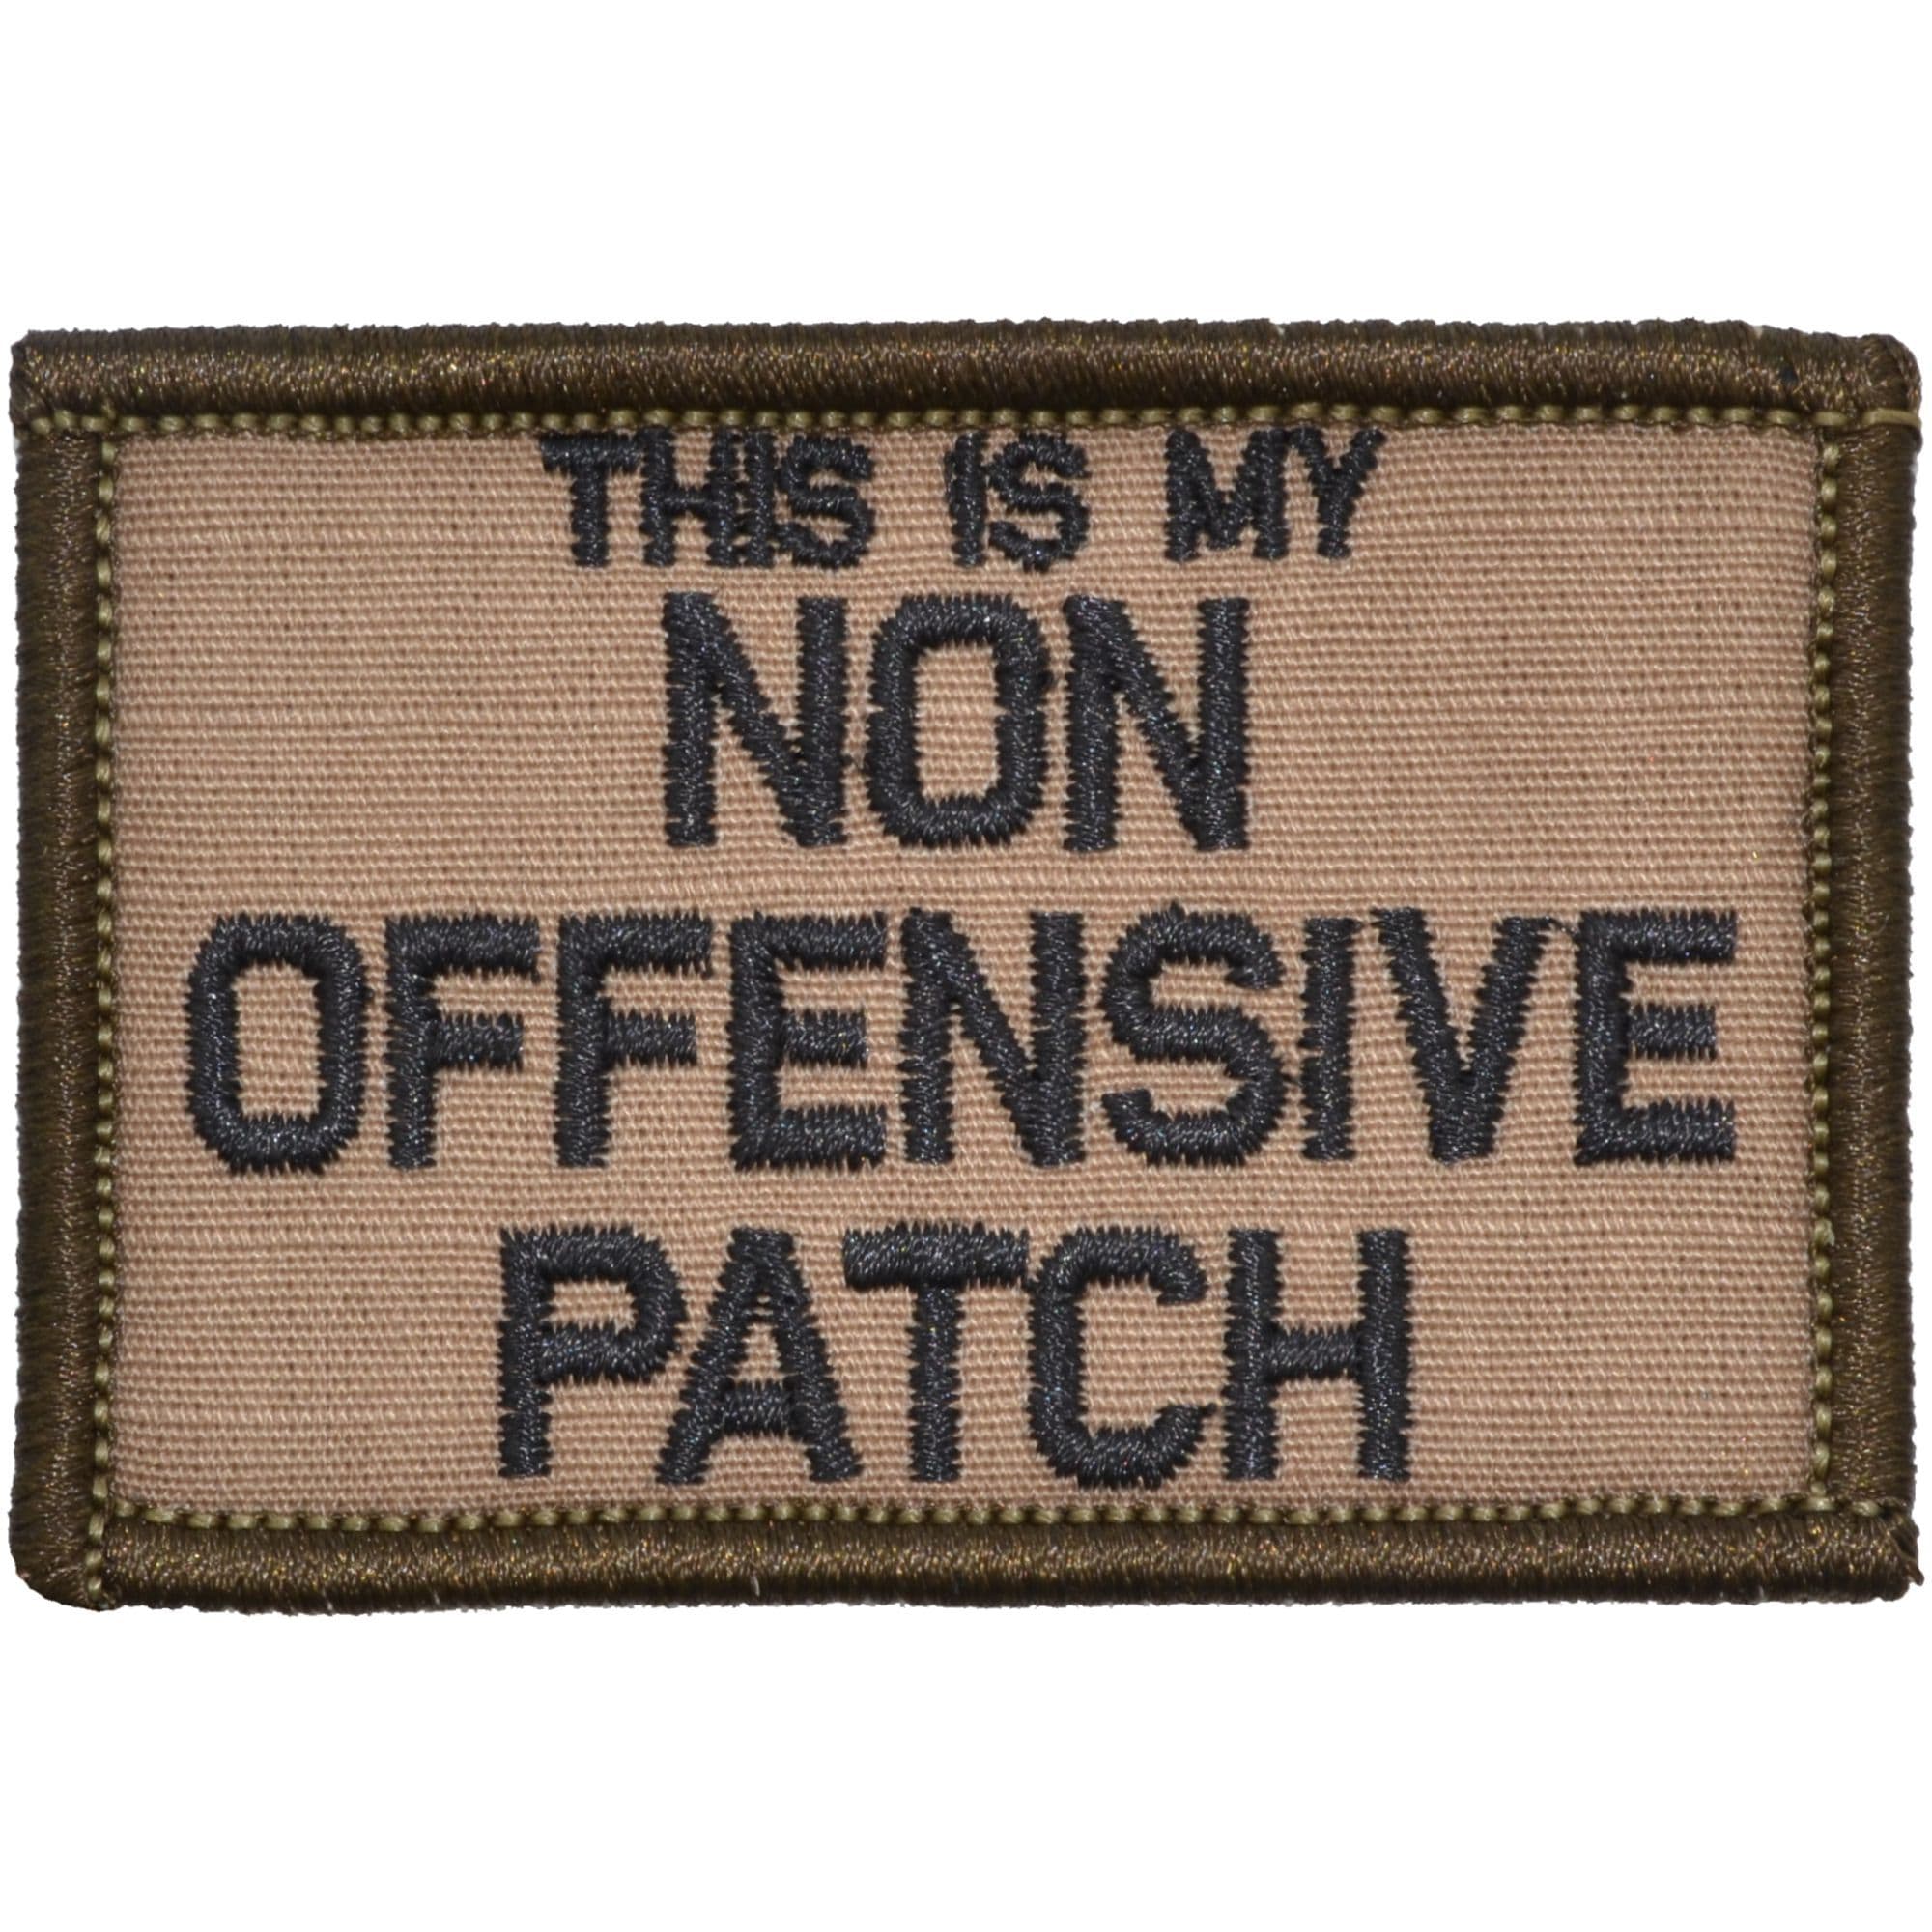 Tactical Gear Junkie Patches Coyote Brown w/ Black This Is My Non Offensive Patch - 2x3 Patch